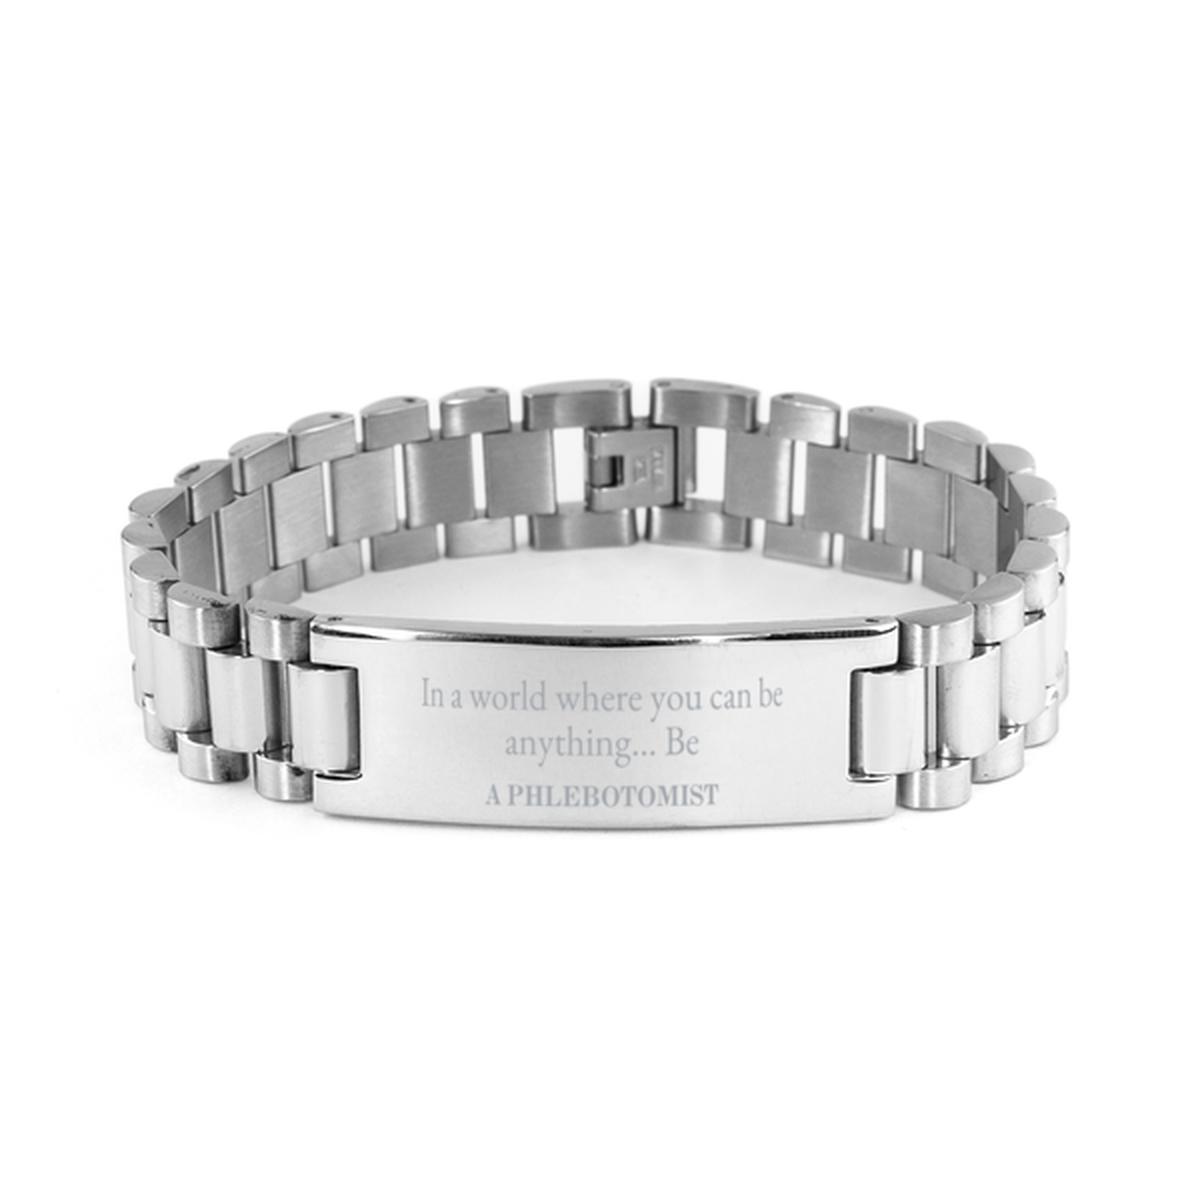 Gifts for Phlebotomist, In a world where you can be anything, Appreciation Birthday Ladder Stainless Steel Bracelet for Men, Women, Friends, Coworkers